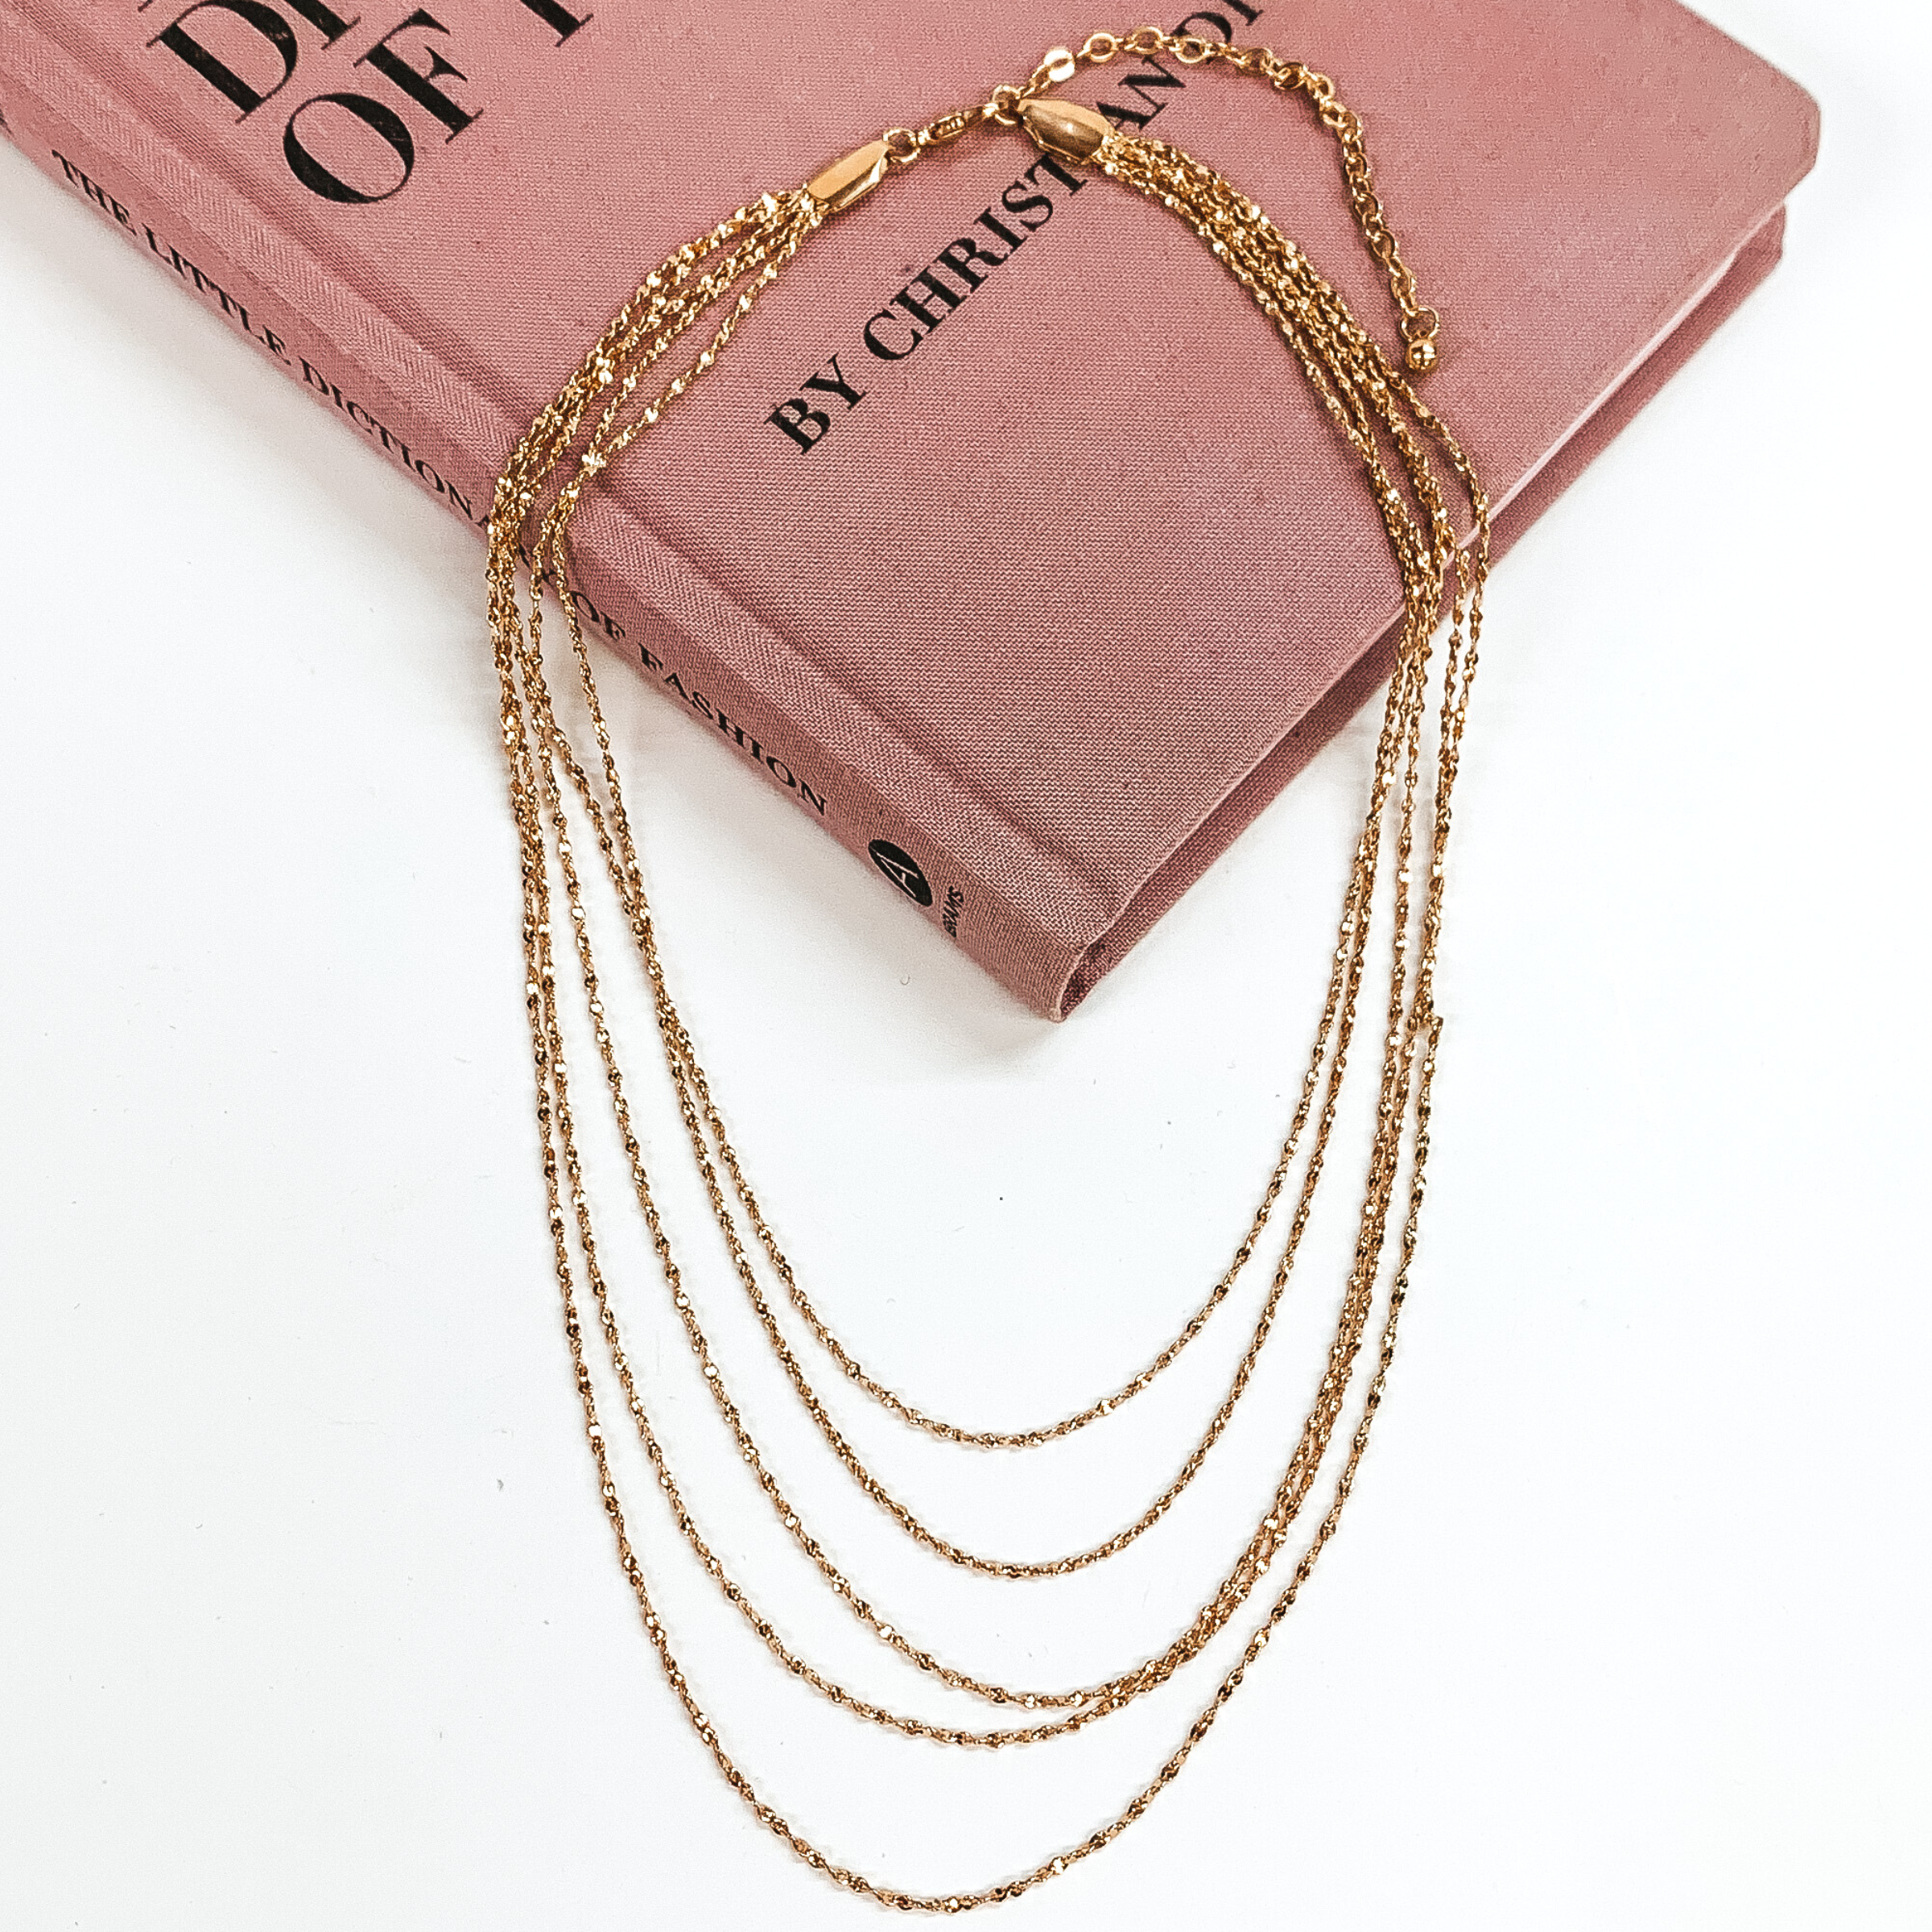 Five stranded silver chain necklace. This necklace is pictured laying on a pink book on a white background. 